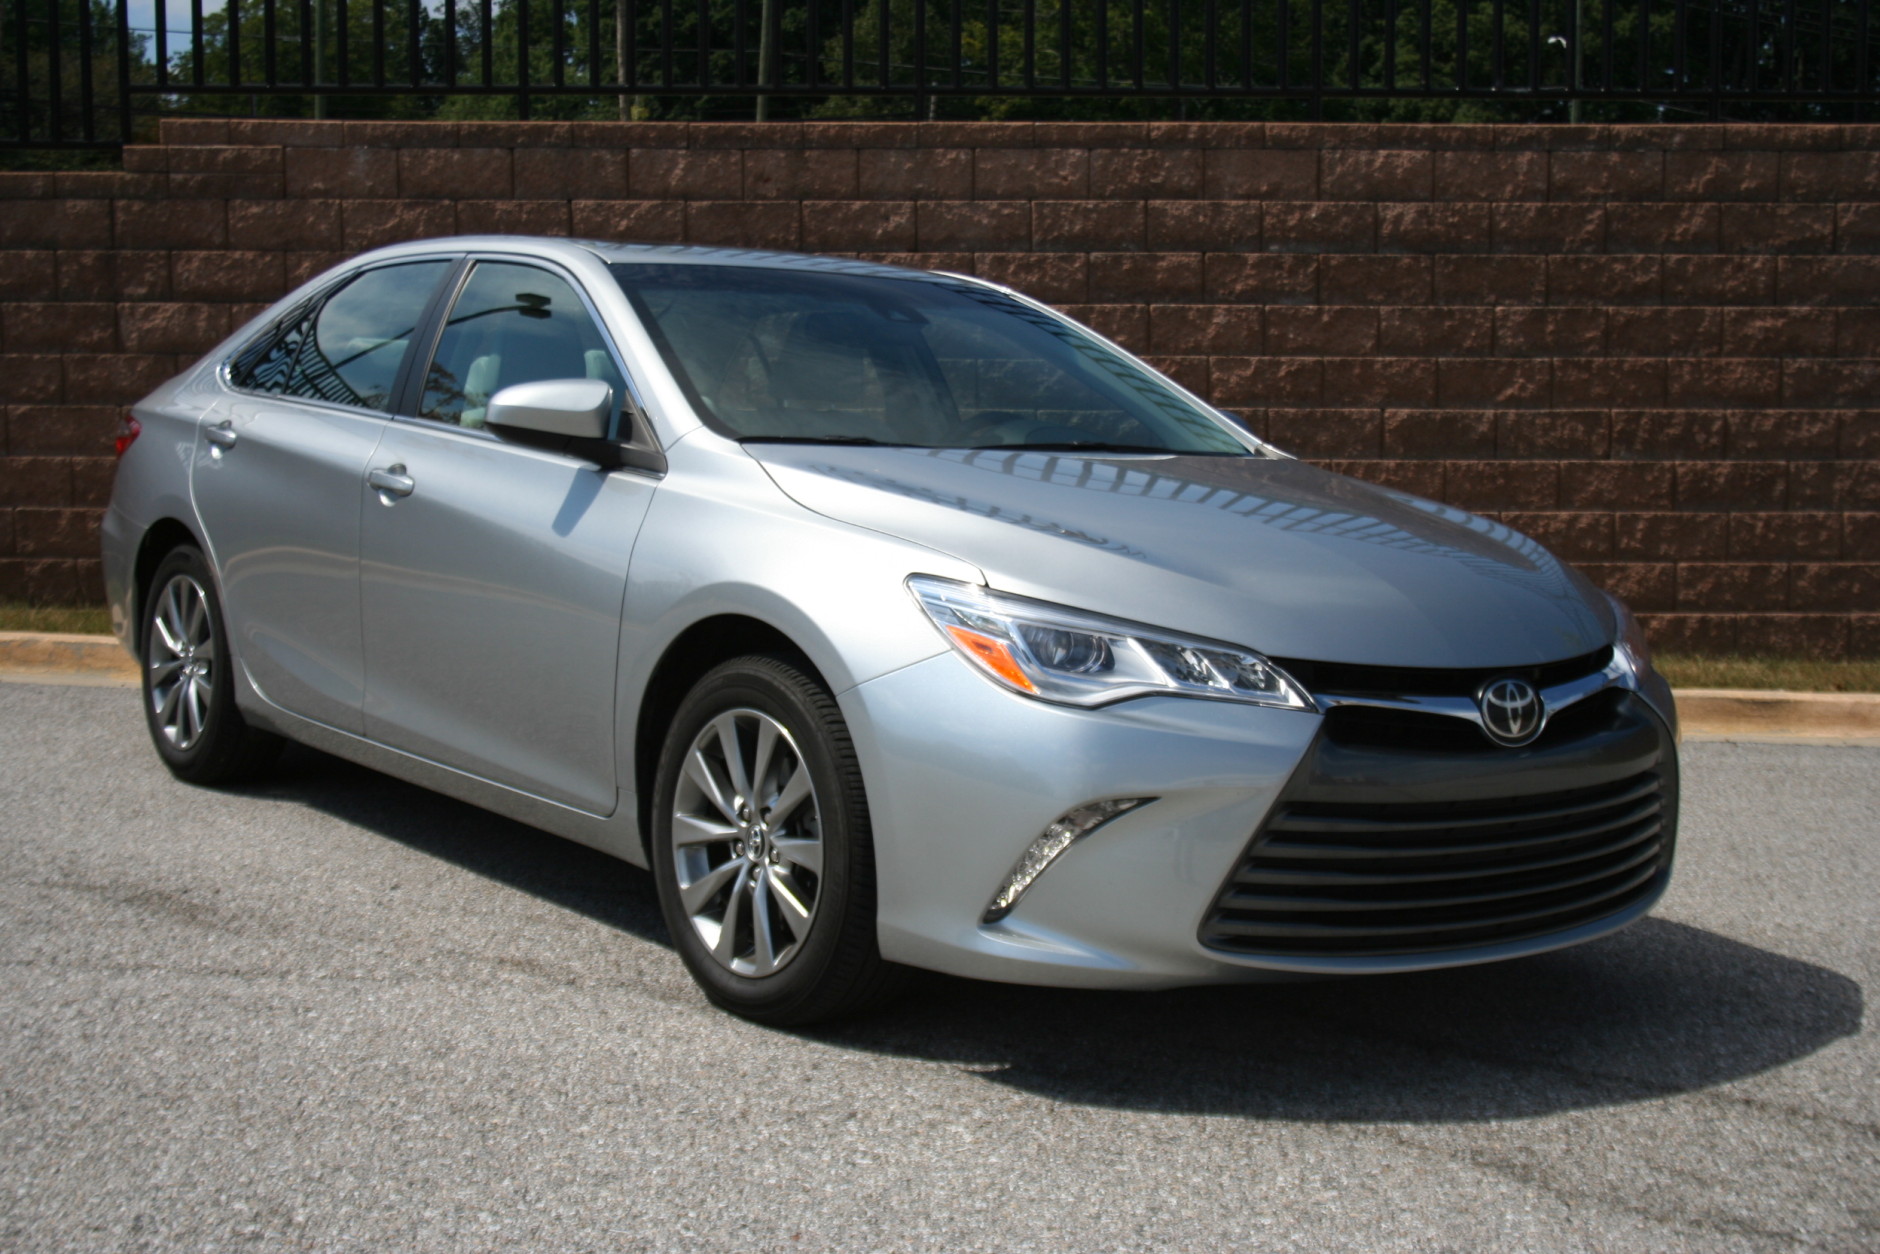 The 2015 Camry  boasts more interesting styling than past models. (WTOP/Mike Parris)